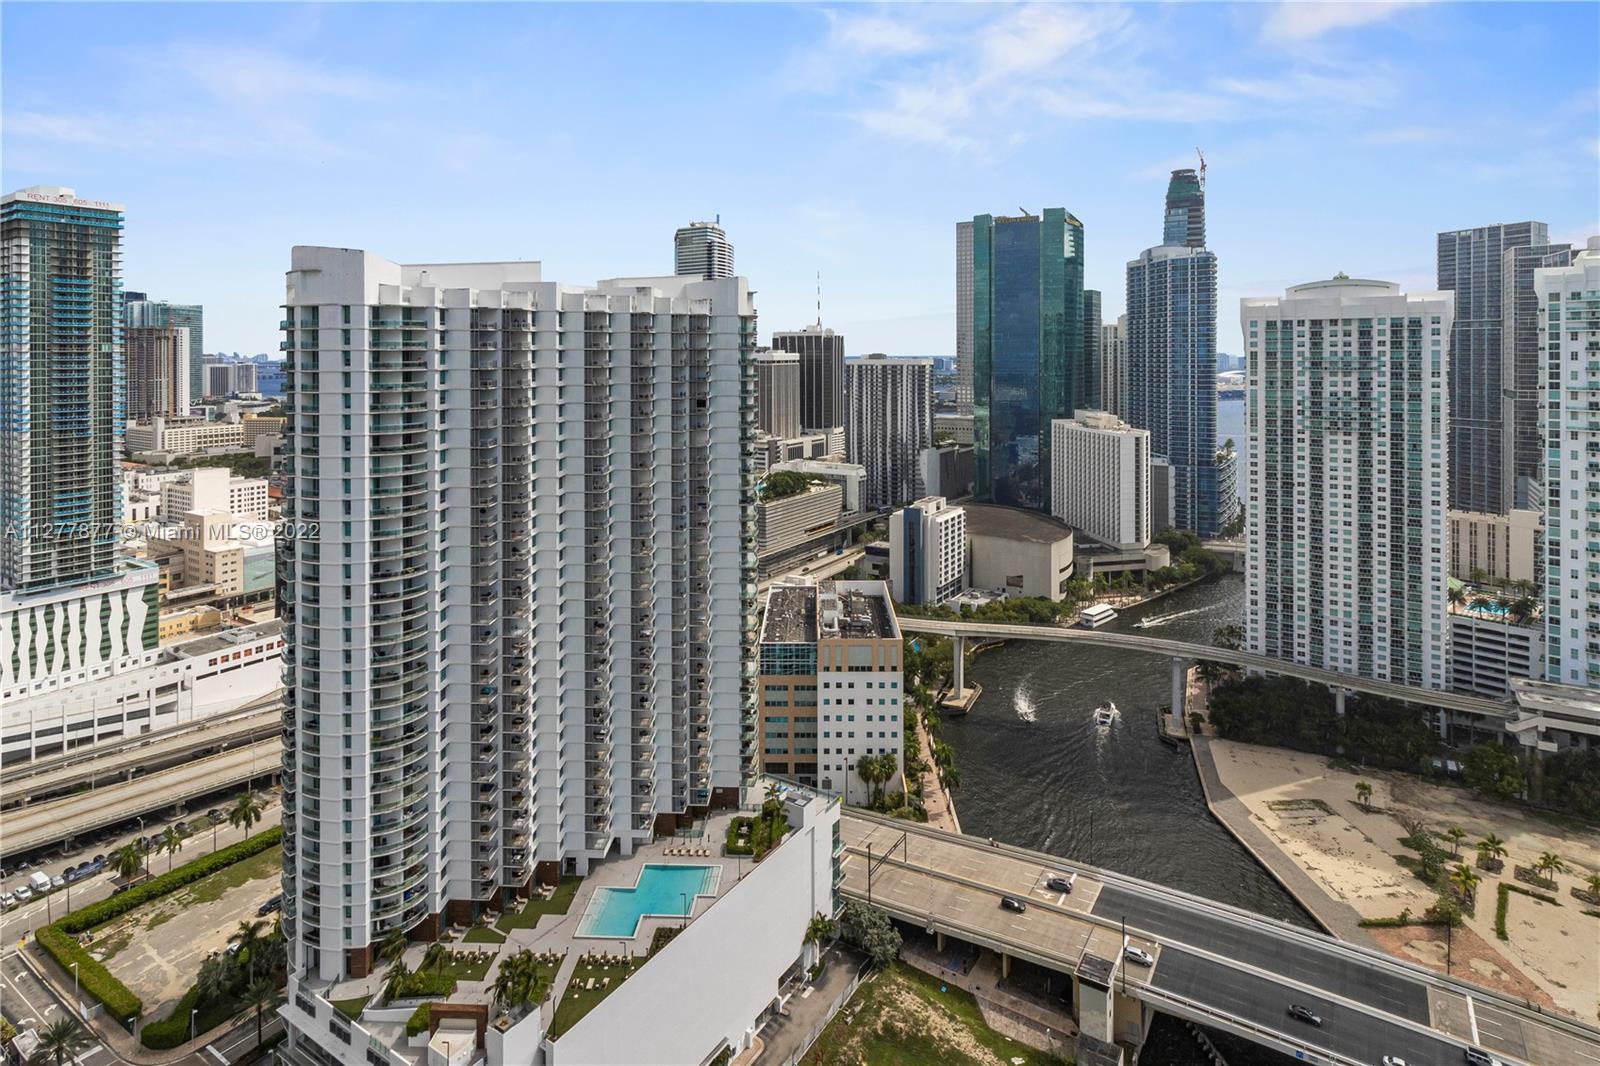 INVESTORS!!! Beautiful 2 master bedrooms unit, located in Downtown/Brickell area, at the luxurious Mint with amazing view over pool deck and Miami river, stainless steel appliances, plenty of natural light, washer/dryer hook-up in the unit, ceramic floors, walk-in closet. One assigned parking spot on the 3rd floor. Front desk and security 24/7. 5 star amenities building including heated pool, jacuzzi, fitness center, sauna, steam room, pool table, playground, business center. Walking distances to Brickell City Centre, free metromover station. 15 minutes to Miami International Airport. Basic cable, internet and water included. Unit currently rented until June, 2023 for $ 4,000/ month.